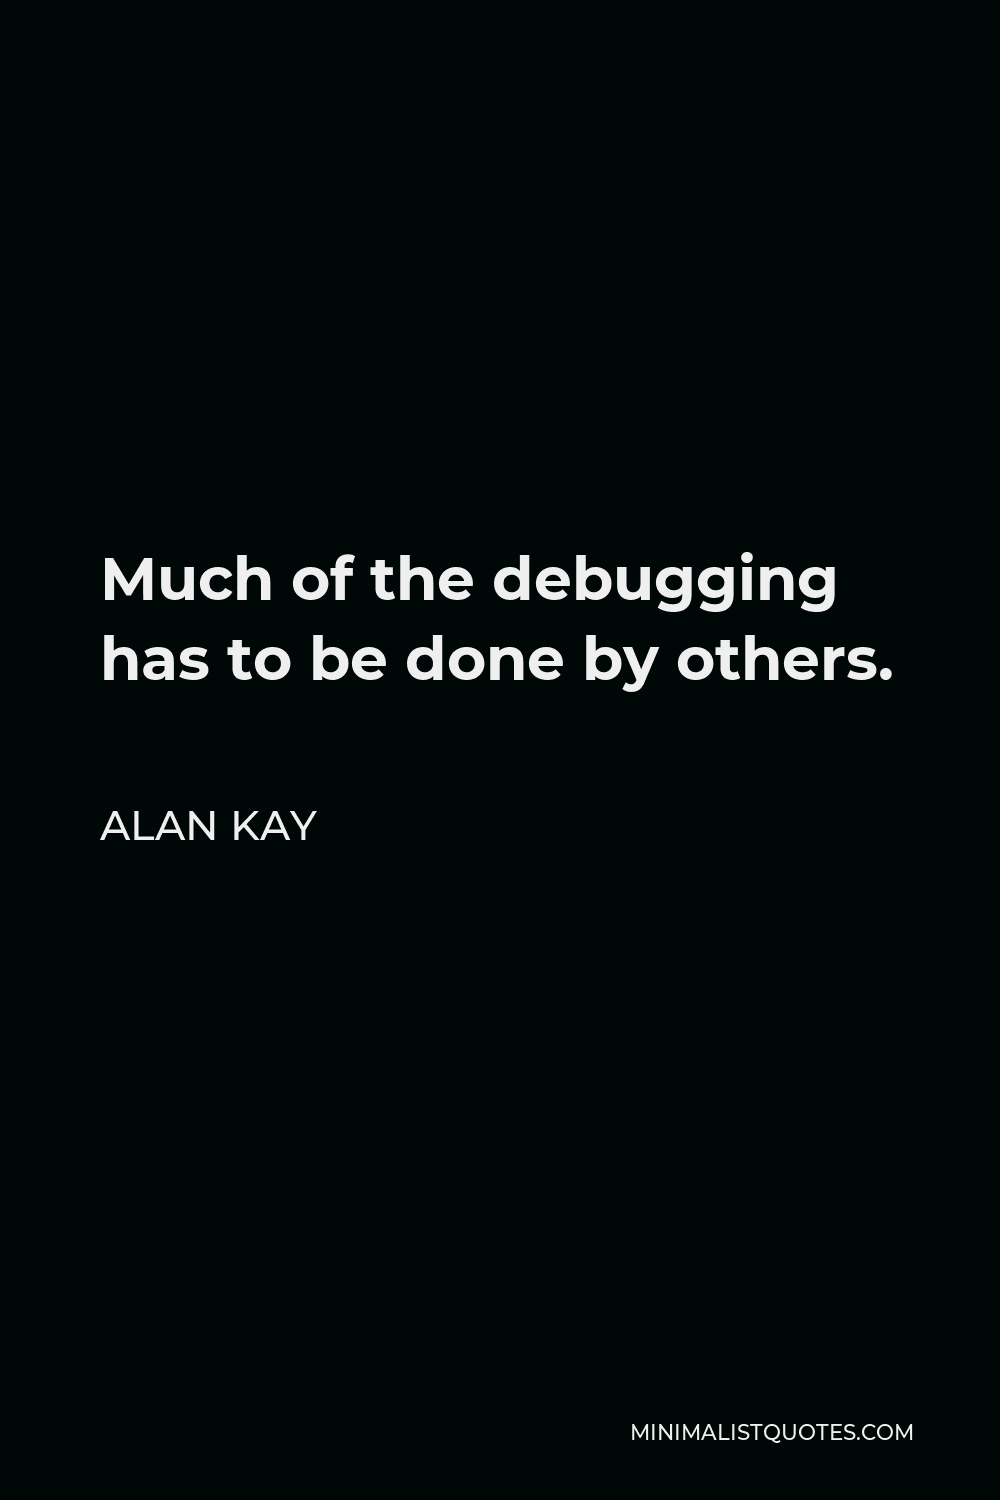 Alan Kay Quote - Much of the debugging has to be done by others.